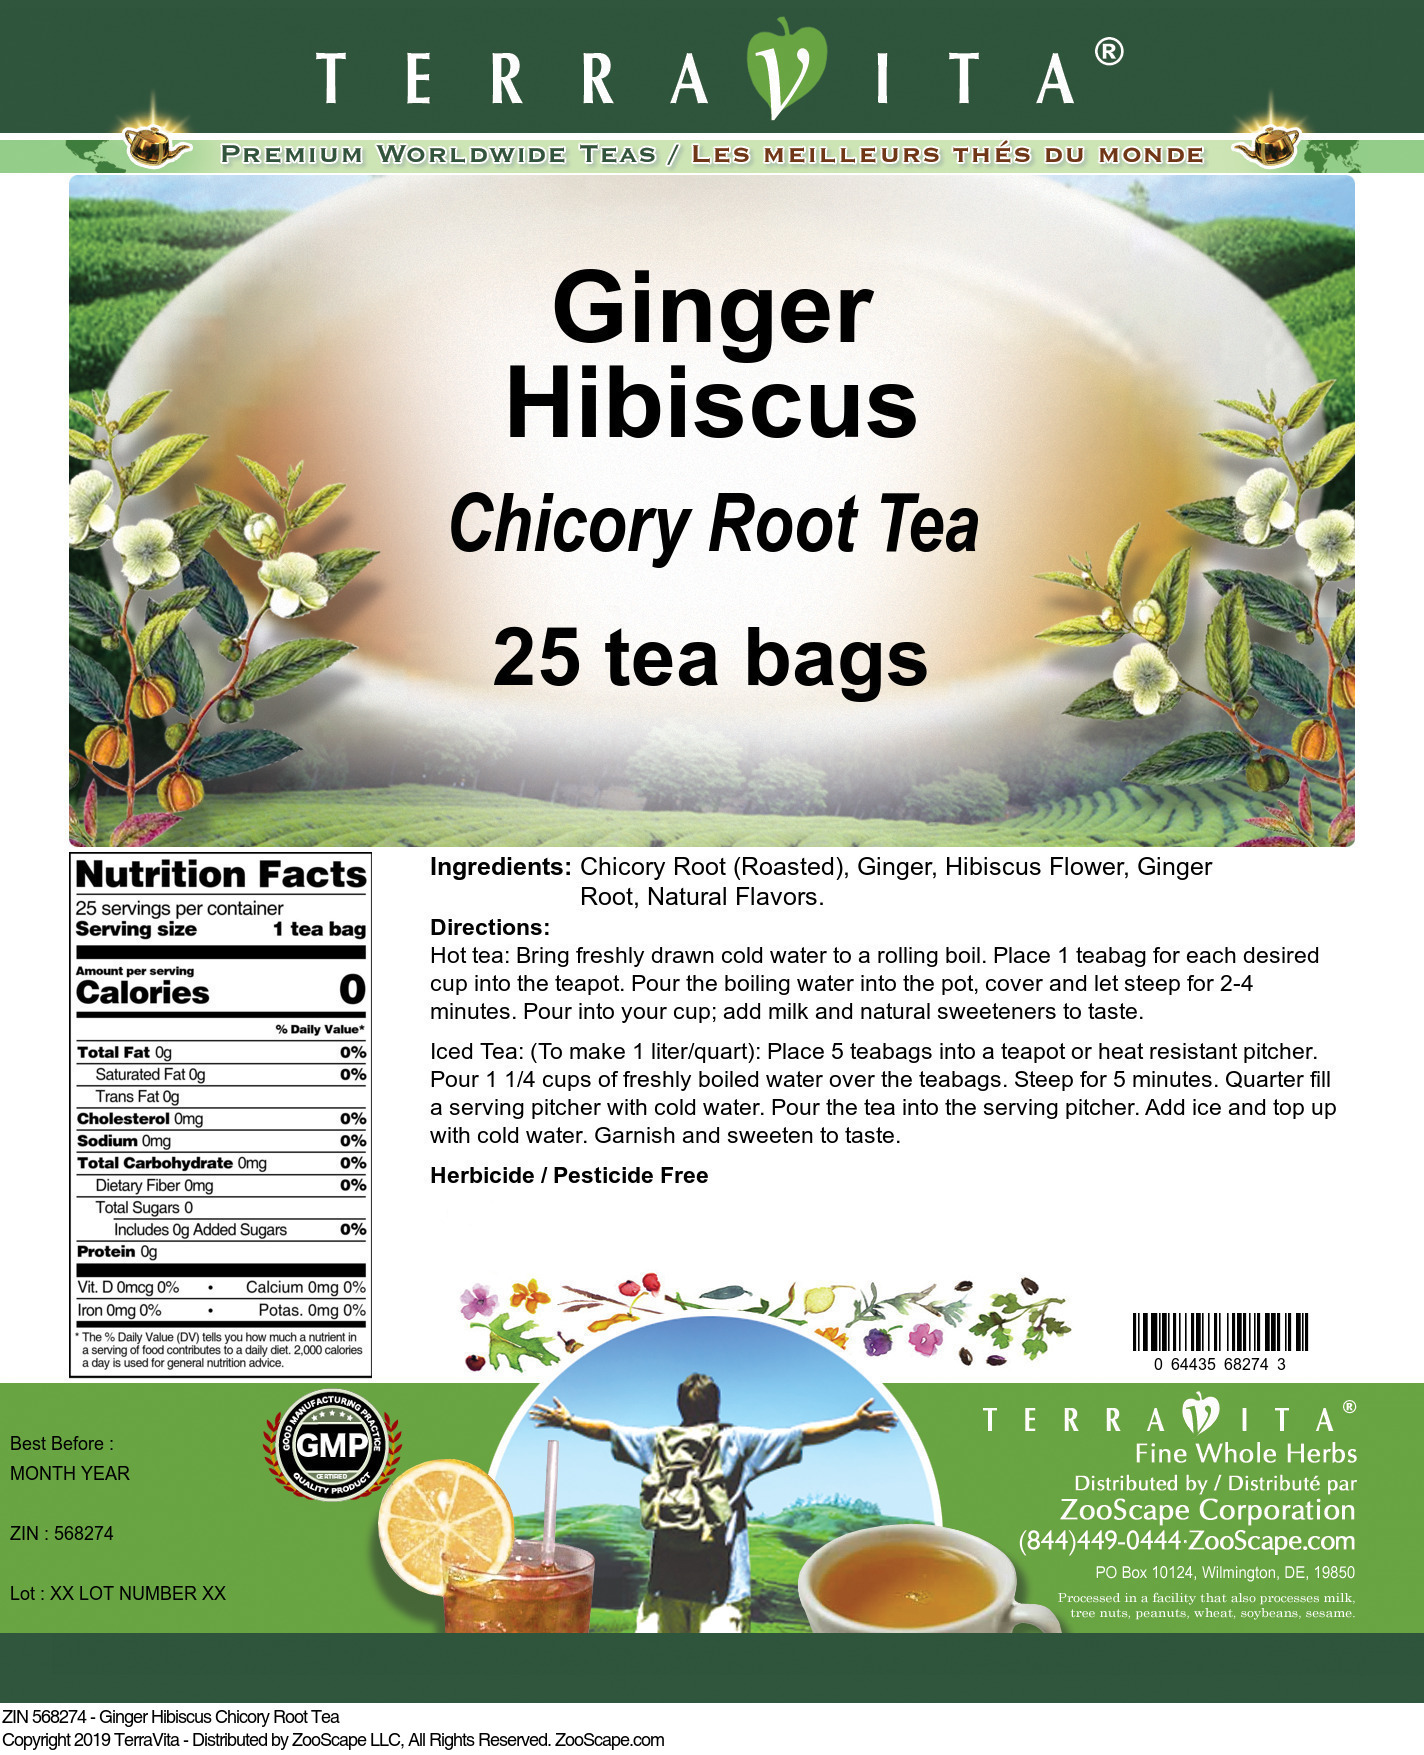 Ginger Hibiscus Chicory Root Tea - Label